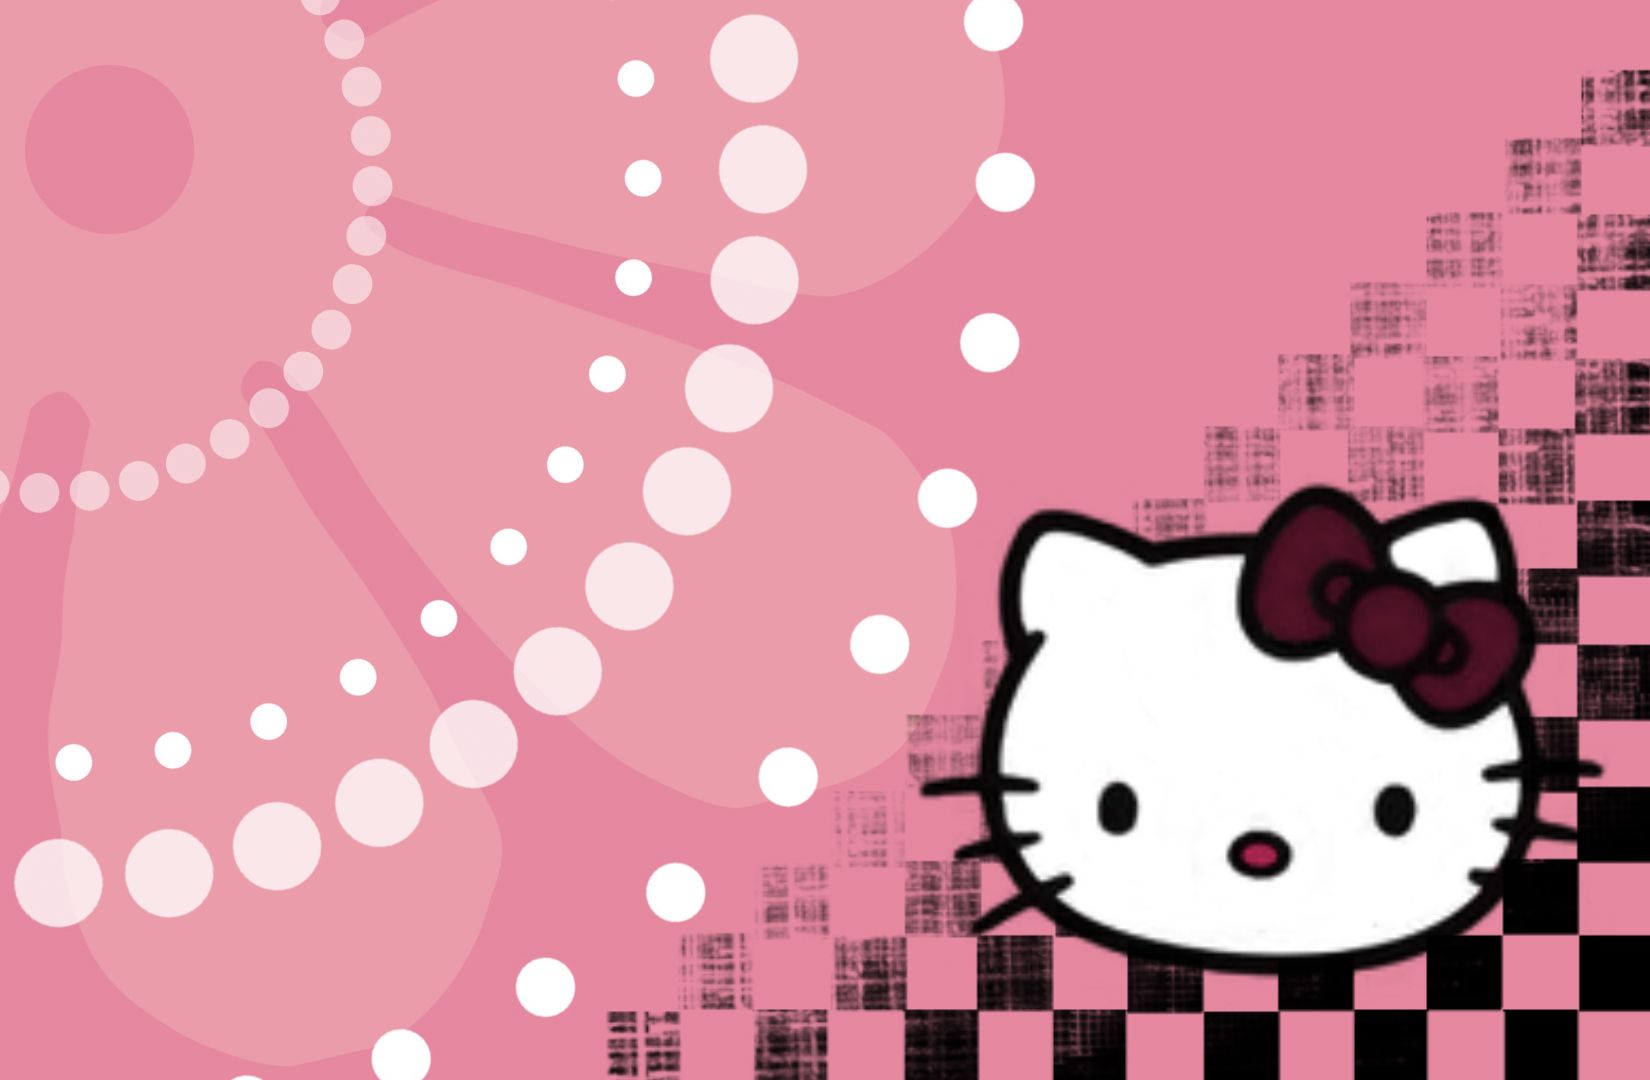 Download Full Hello Kitty Wallpaper 1650x1080 Full HD Backgrounds